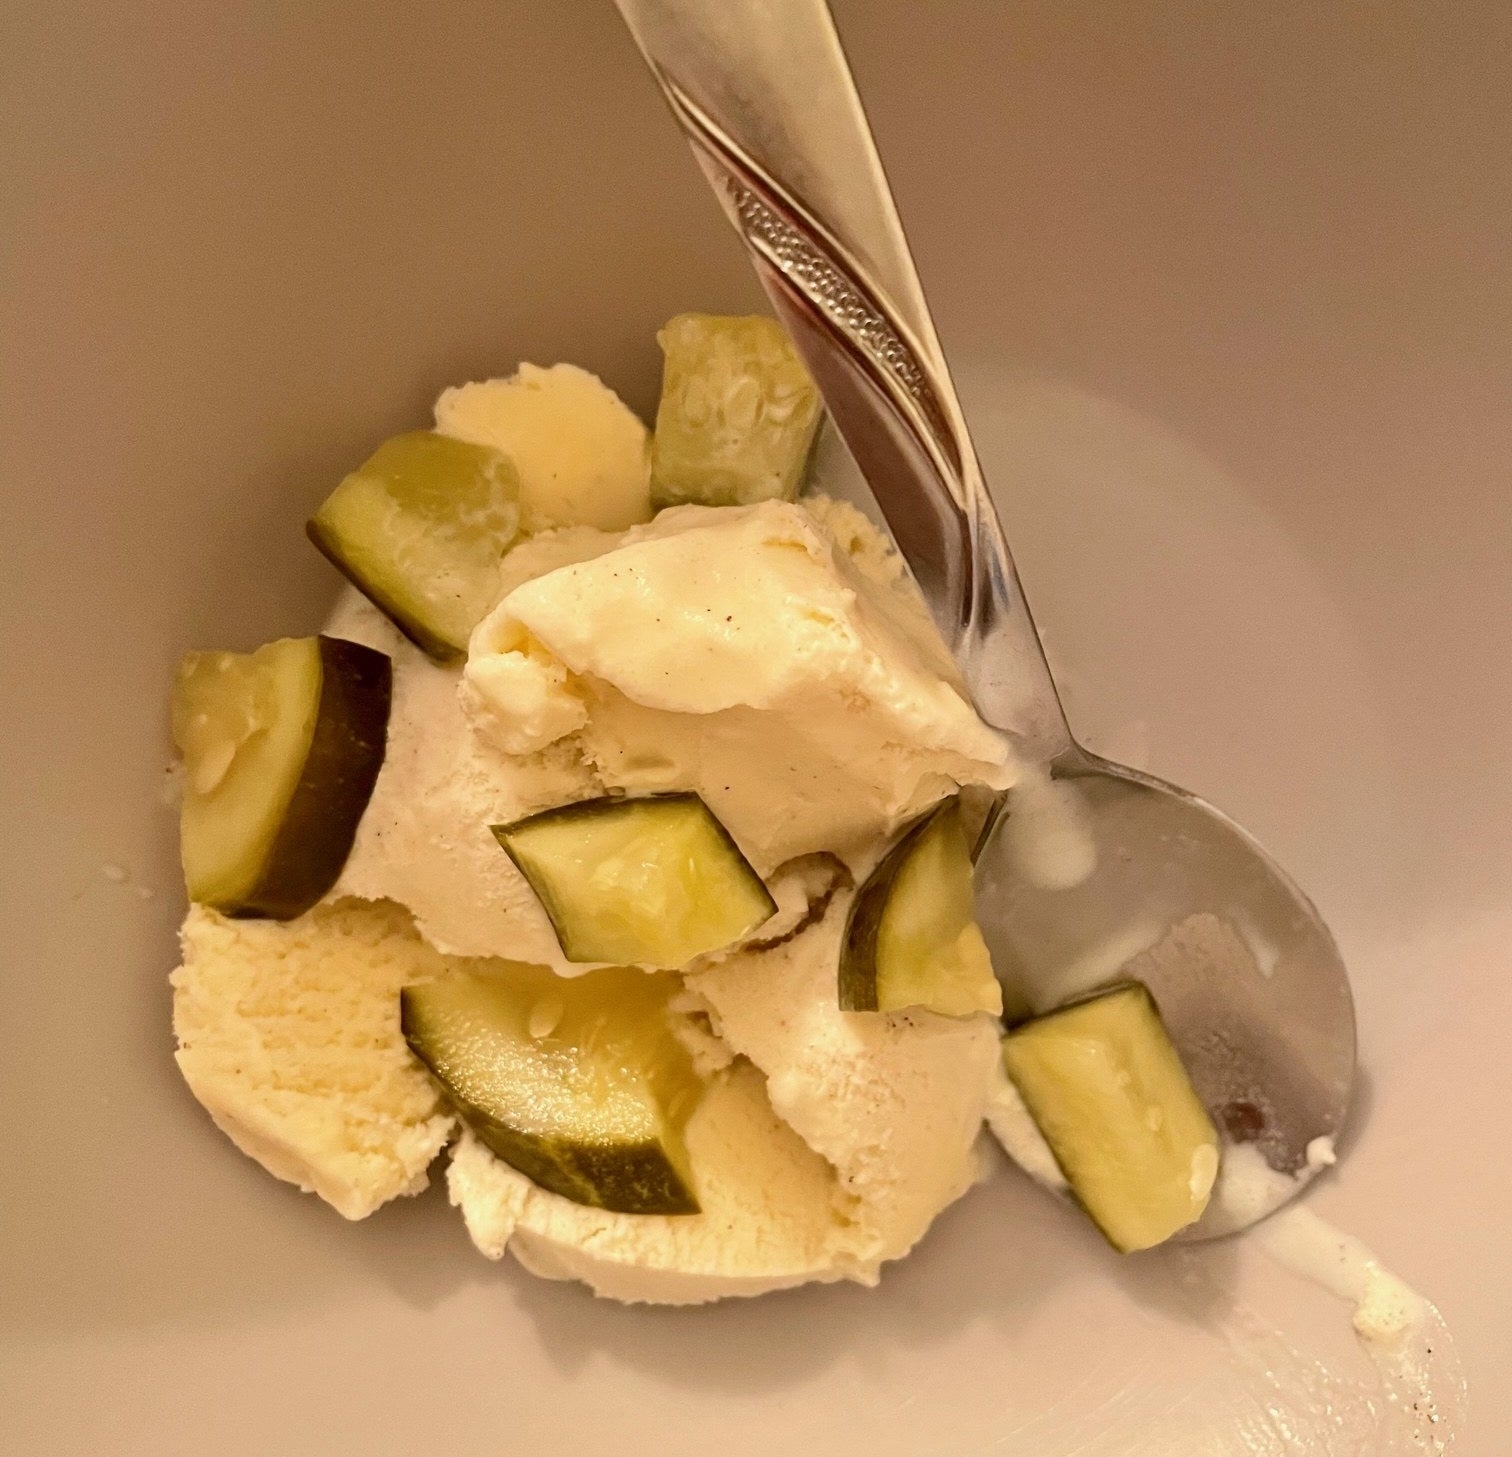 Ice cream and pickles